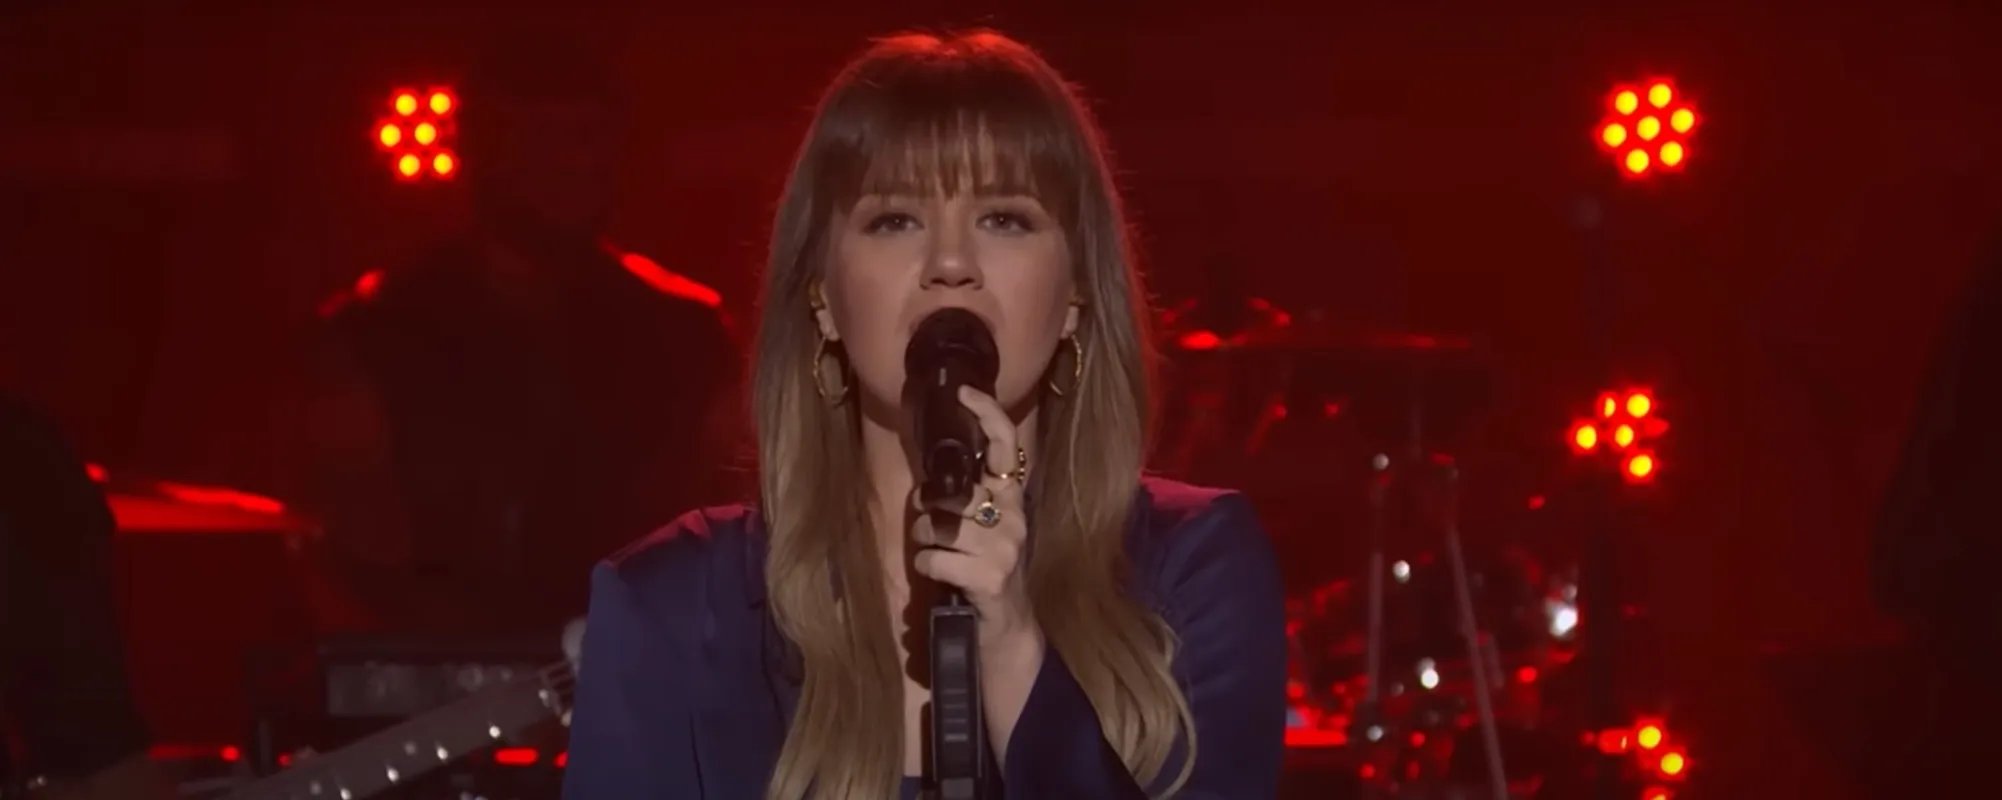 Watch Kelly Clarkson Deliver the Sad Truth With Rocking Cover of Metallica